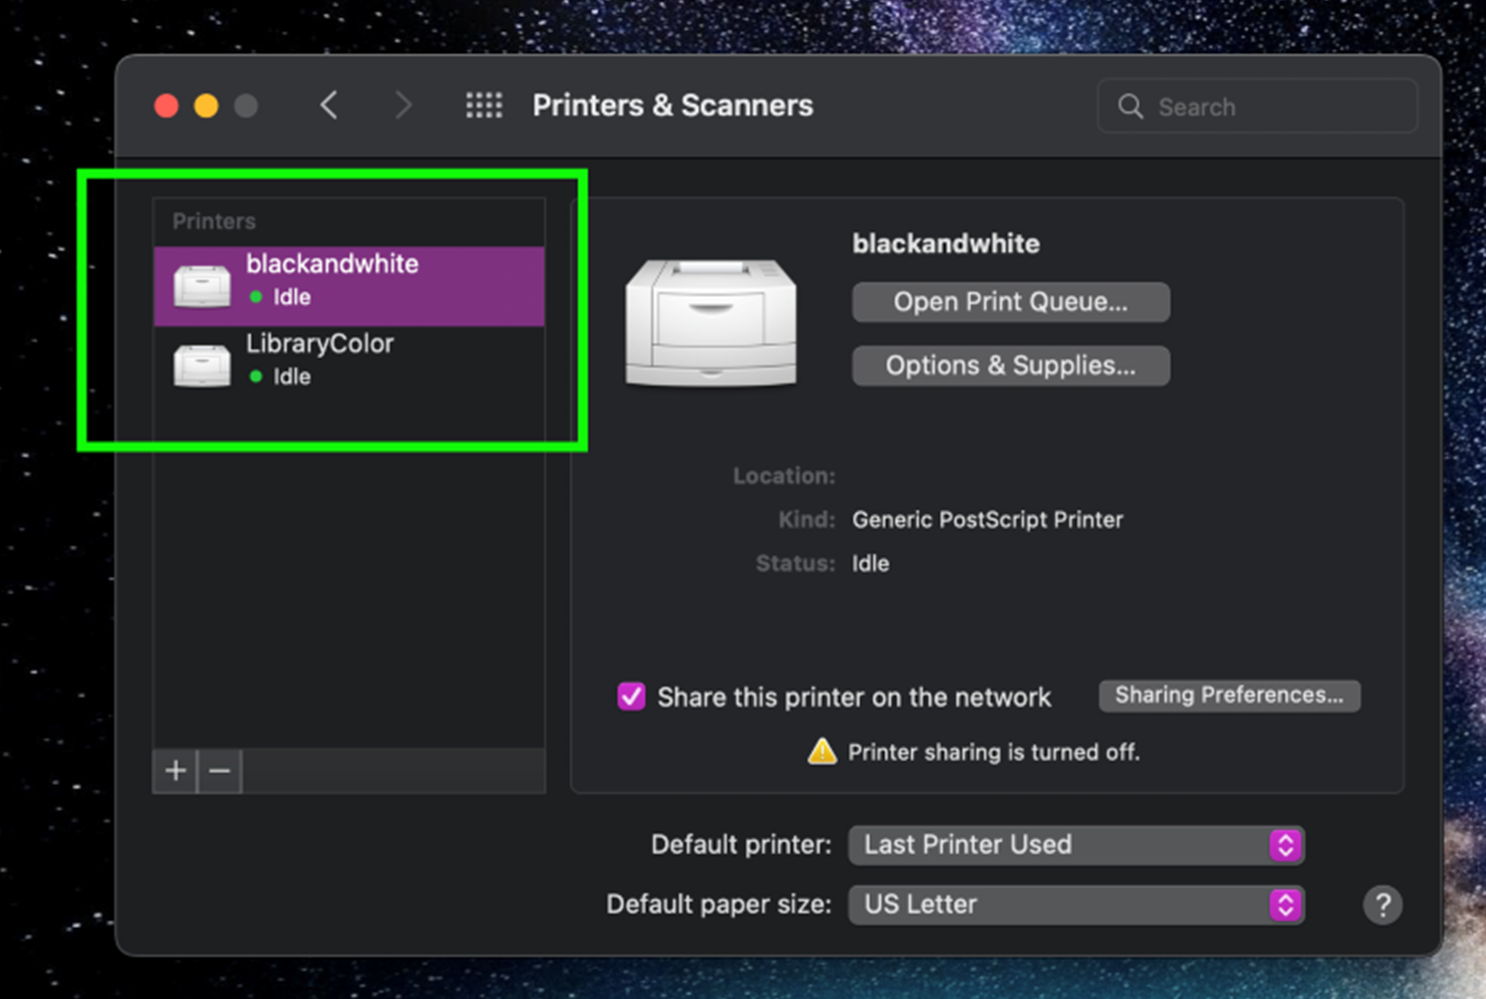 macOS screen showing printers listed in a sidebar in a green box